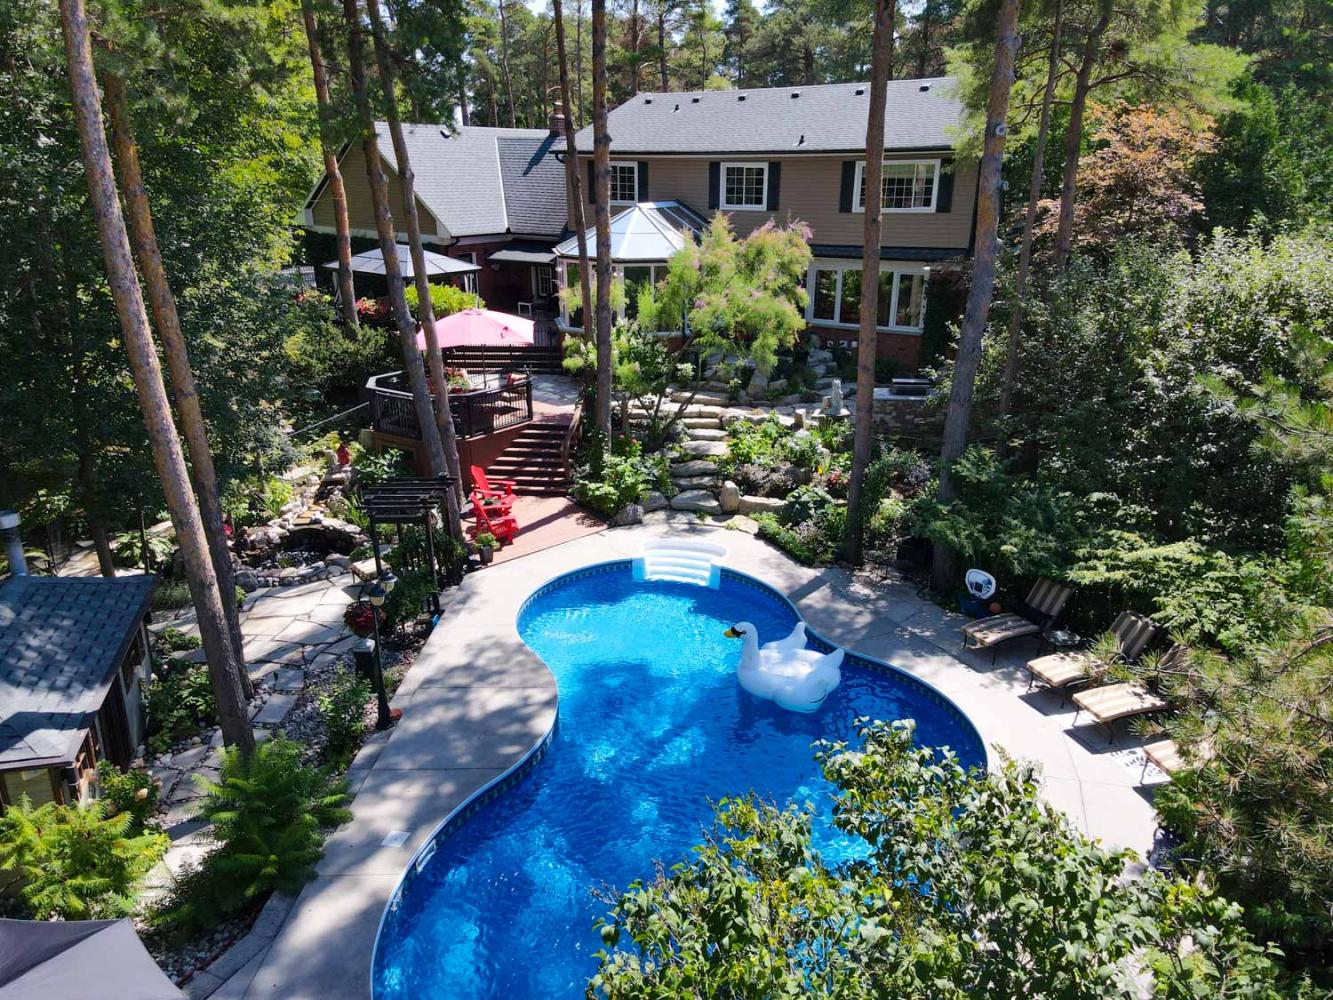 Home of the week: A resort rather than a house’ in Richmond Hill